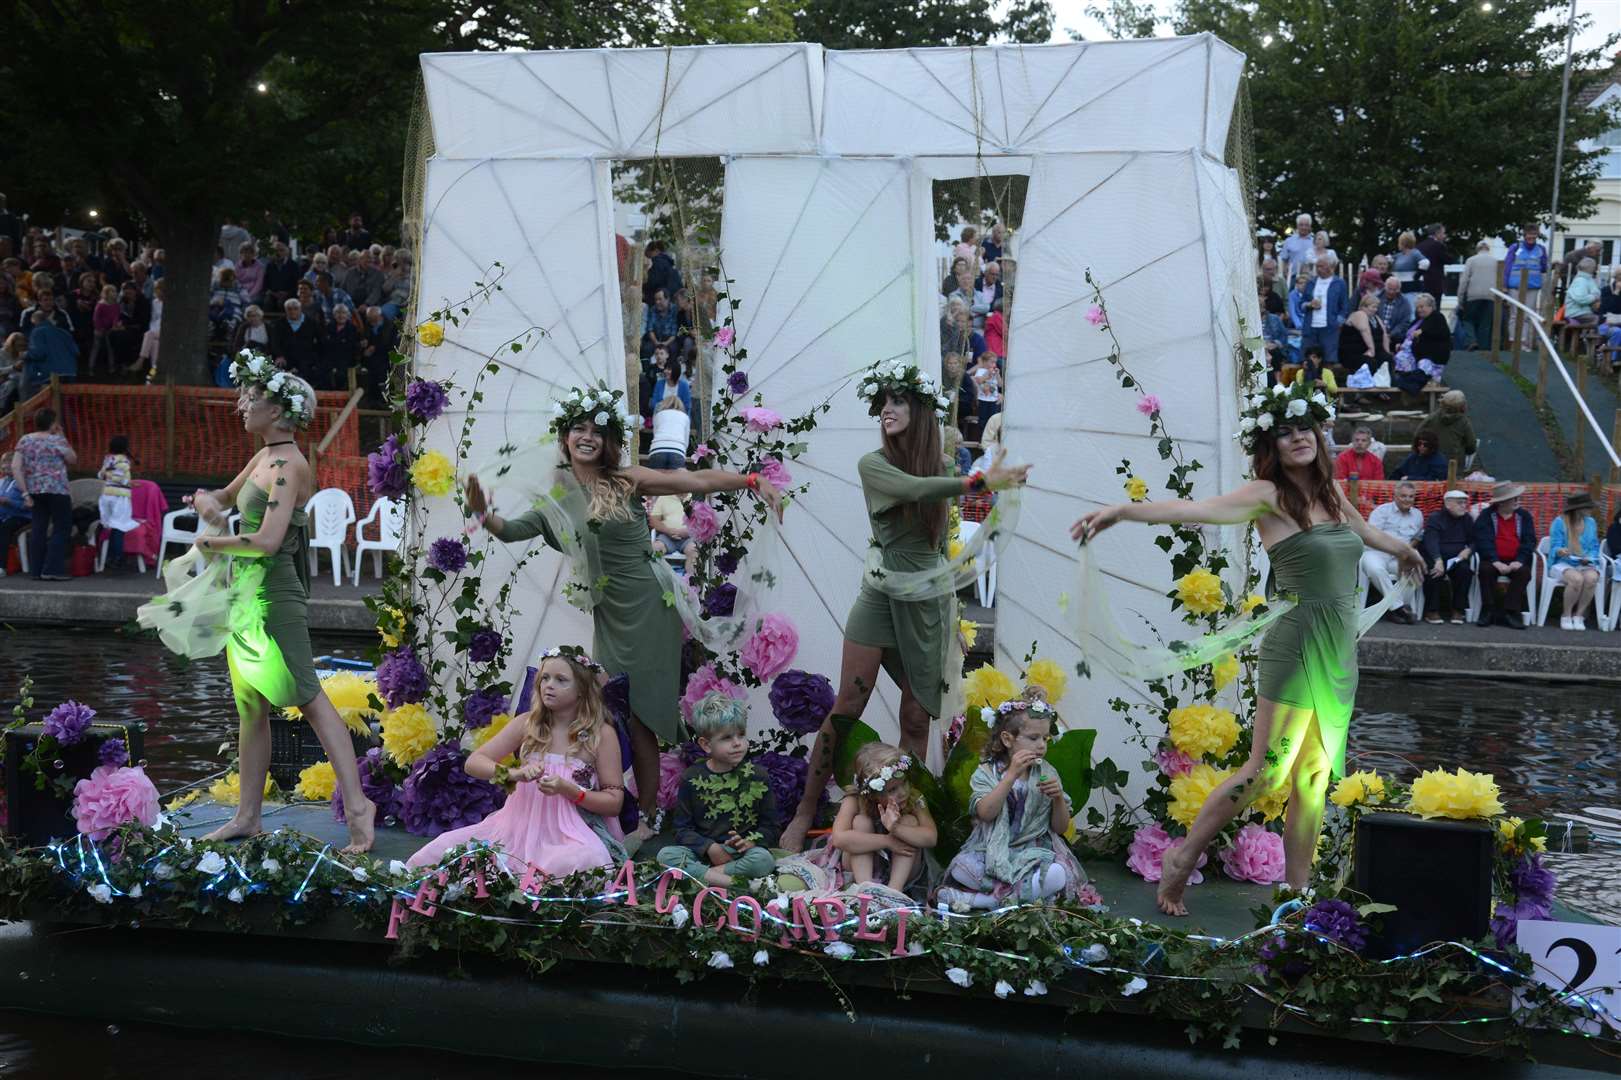 The fete features decorated floats, live music, family entertainment and food and drink. Picture: Gary Browne